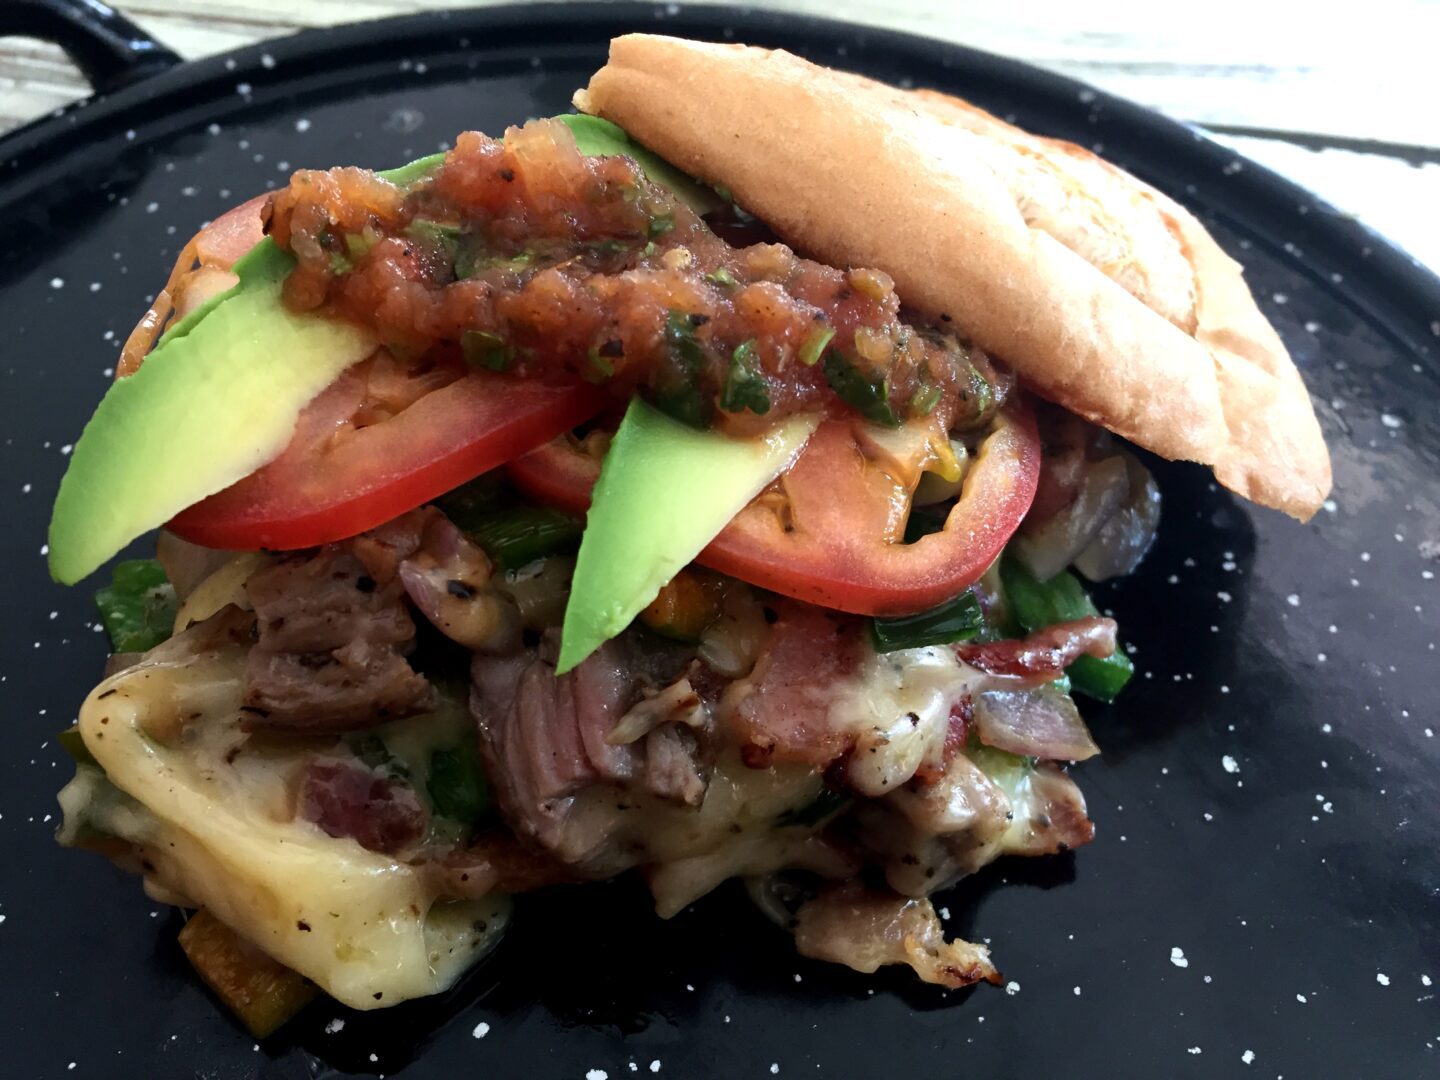 A sandwich with meat, tomatoes and avocado on a black plate.